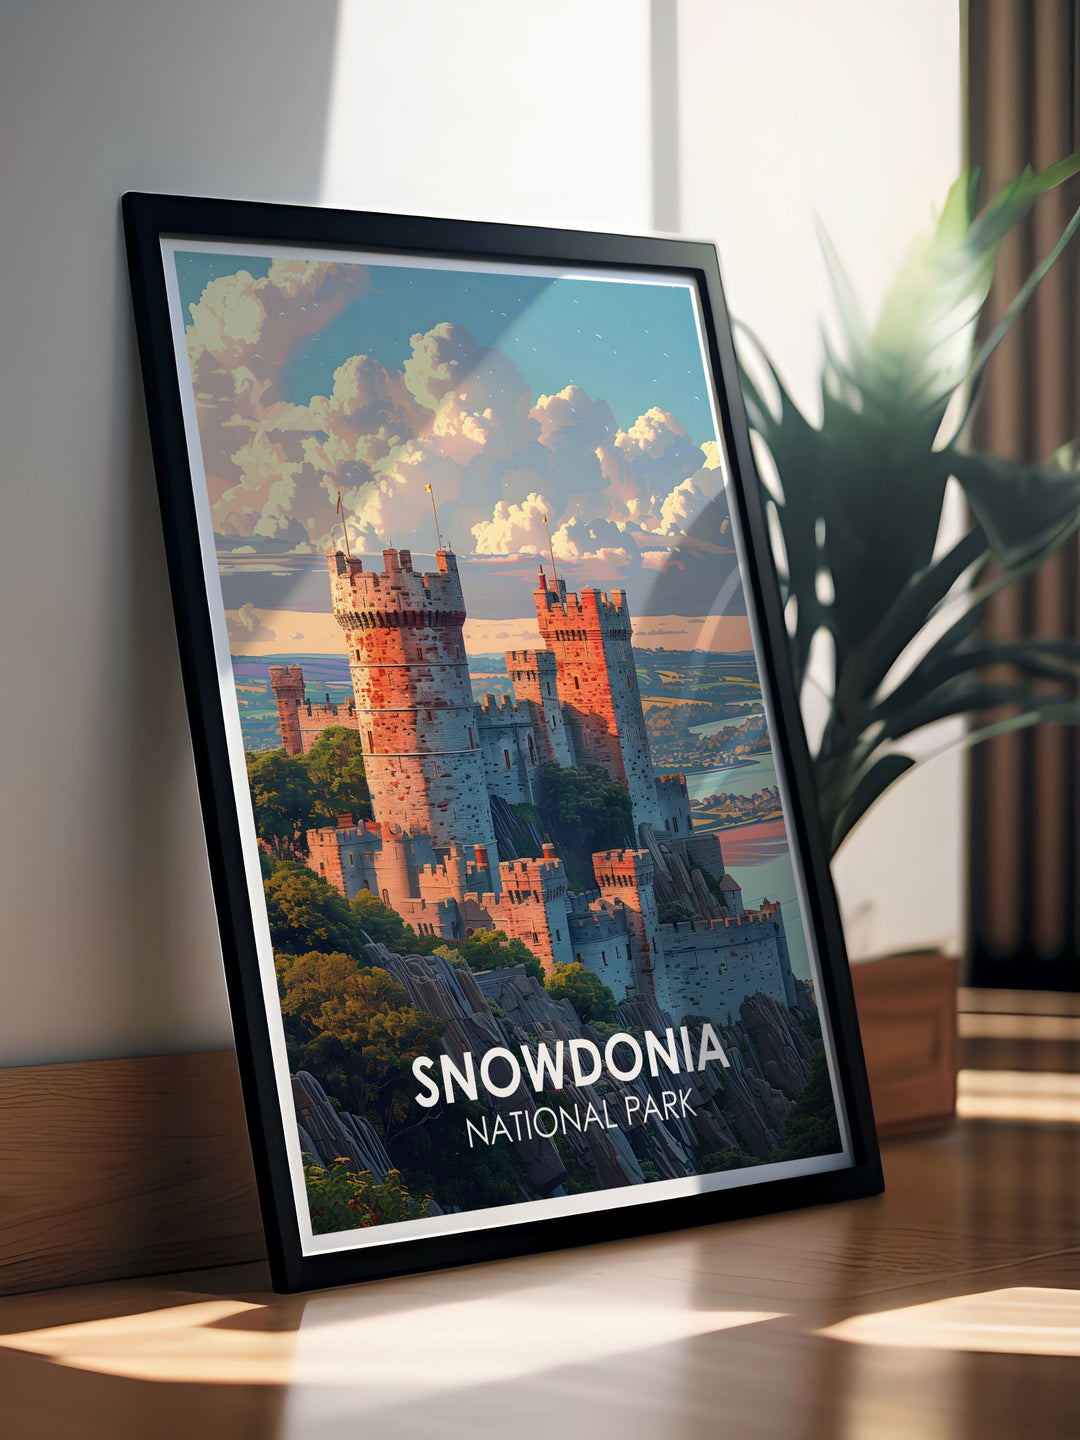 Beautiful Snowdonia wall decor featuring Conwy Castle and the majestic mountains of Snowdonia perfect for adding a touch of nature and history to any living space and a great Snowdonia gift